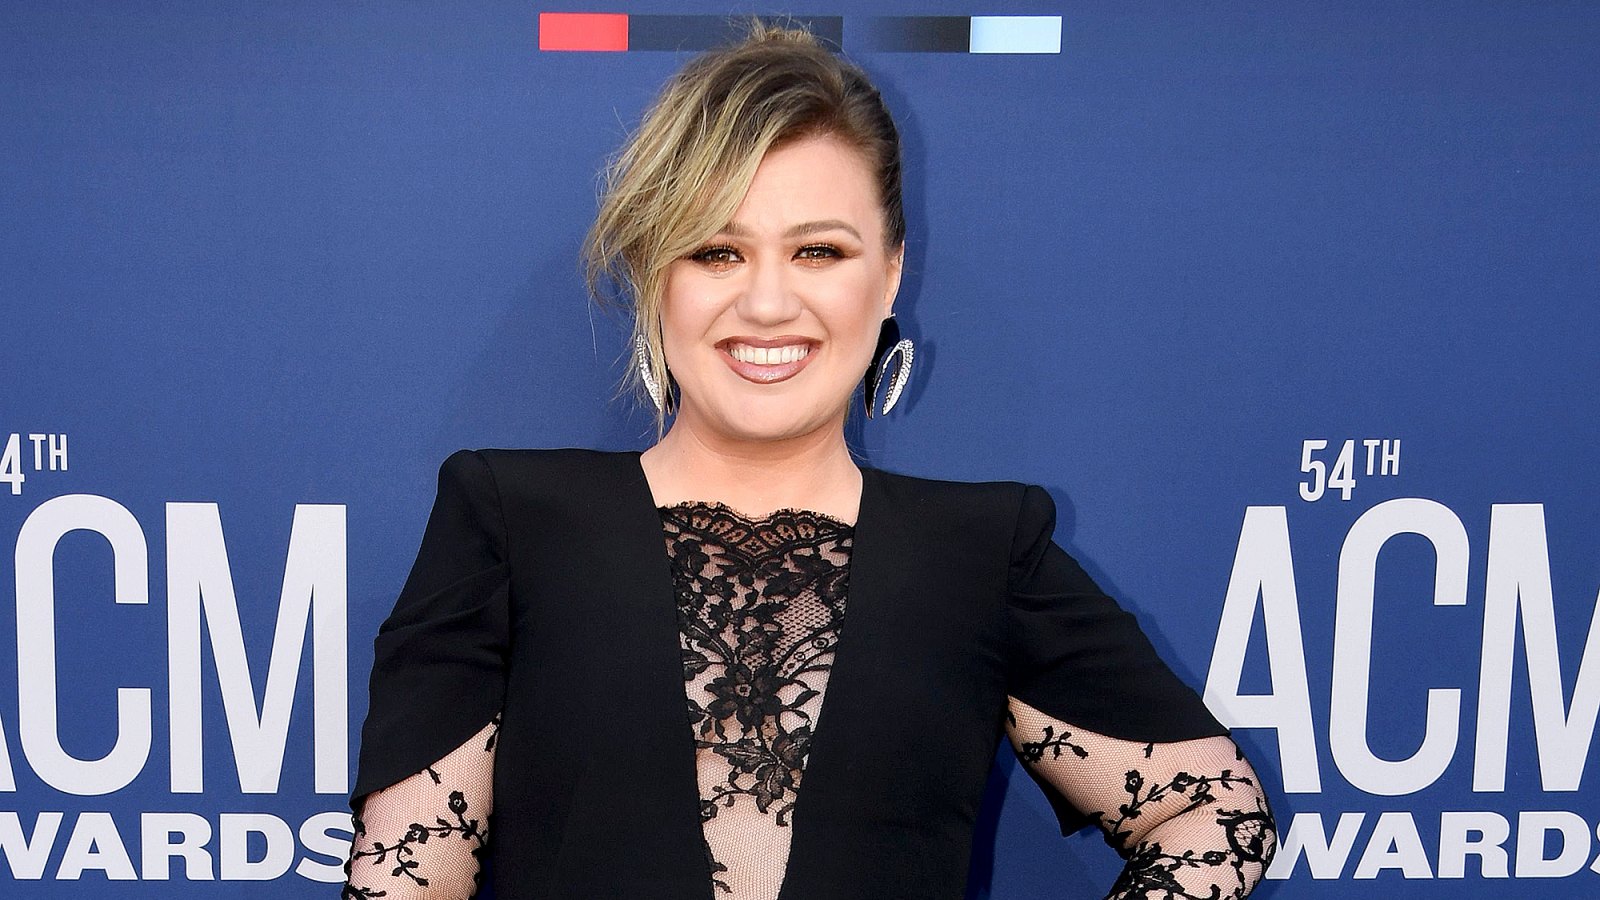 Kelly-Clarkson-Was-Mistaken-for-a-Sit-Filler-at-ACMs